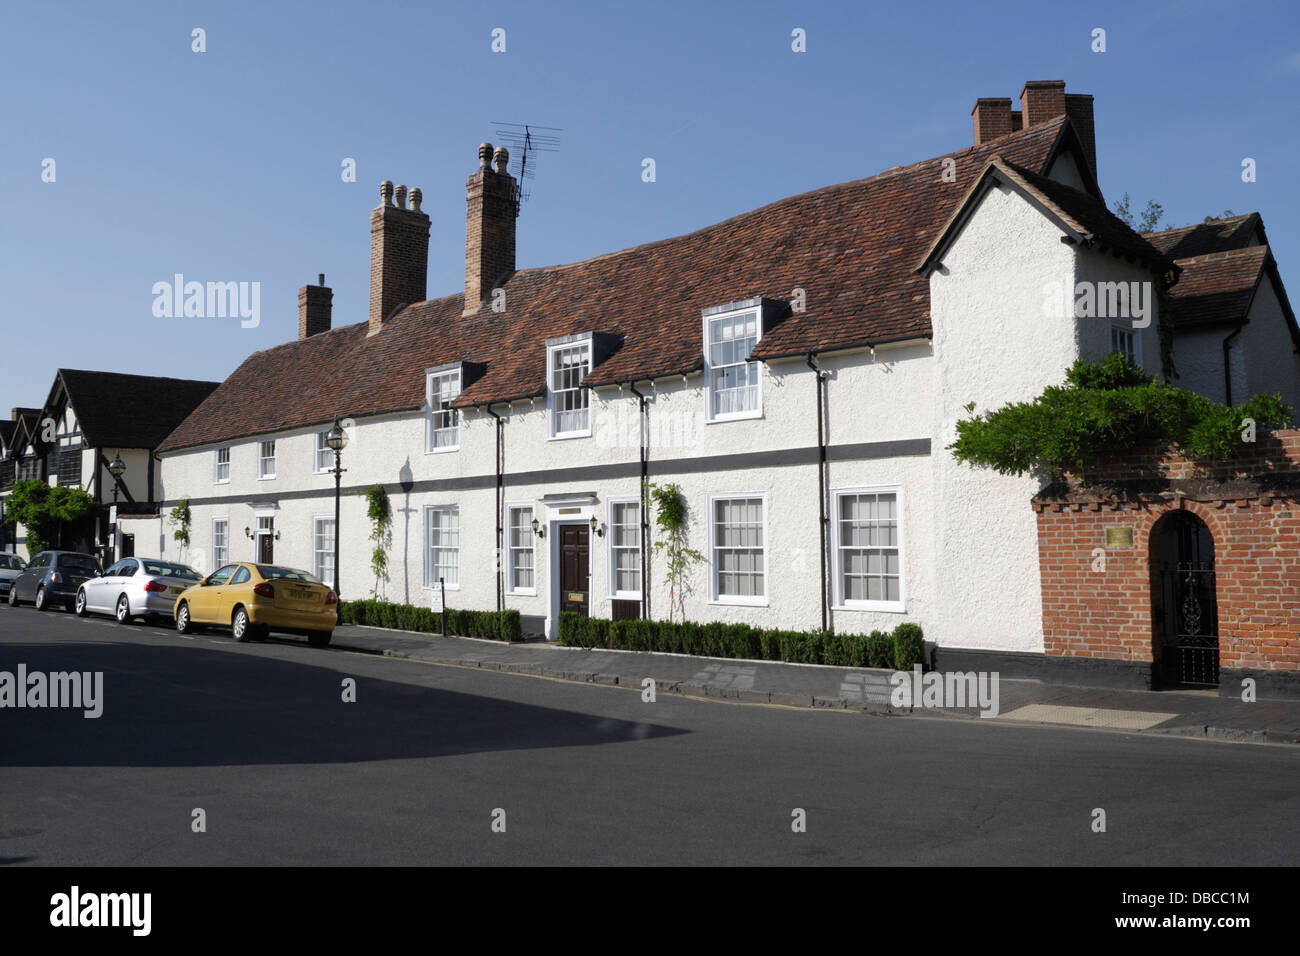 Row of Houses in Stratford Upon Avon old town Stock Photo